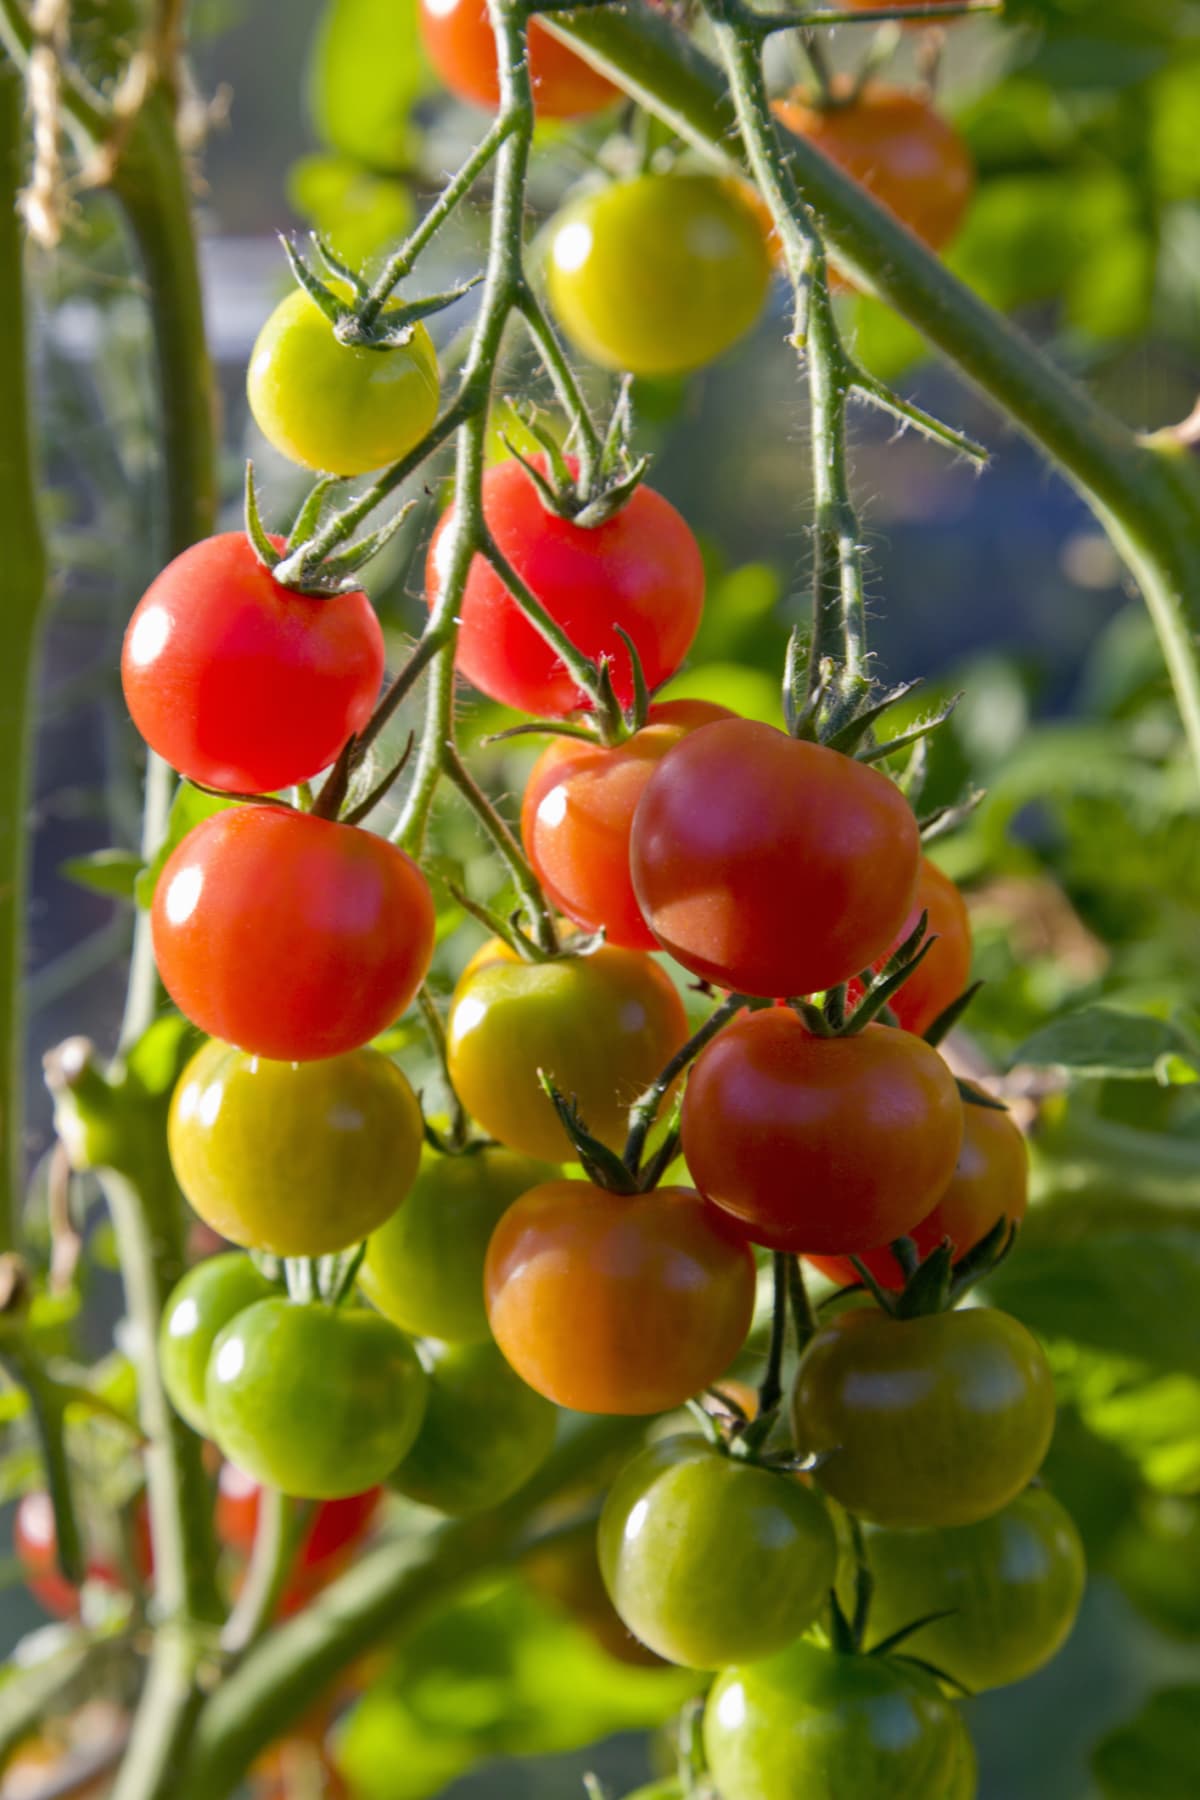 Tomatoes in different ripening stages hanging from a lush, green plant